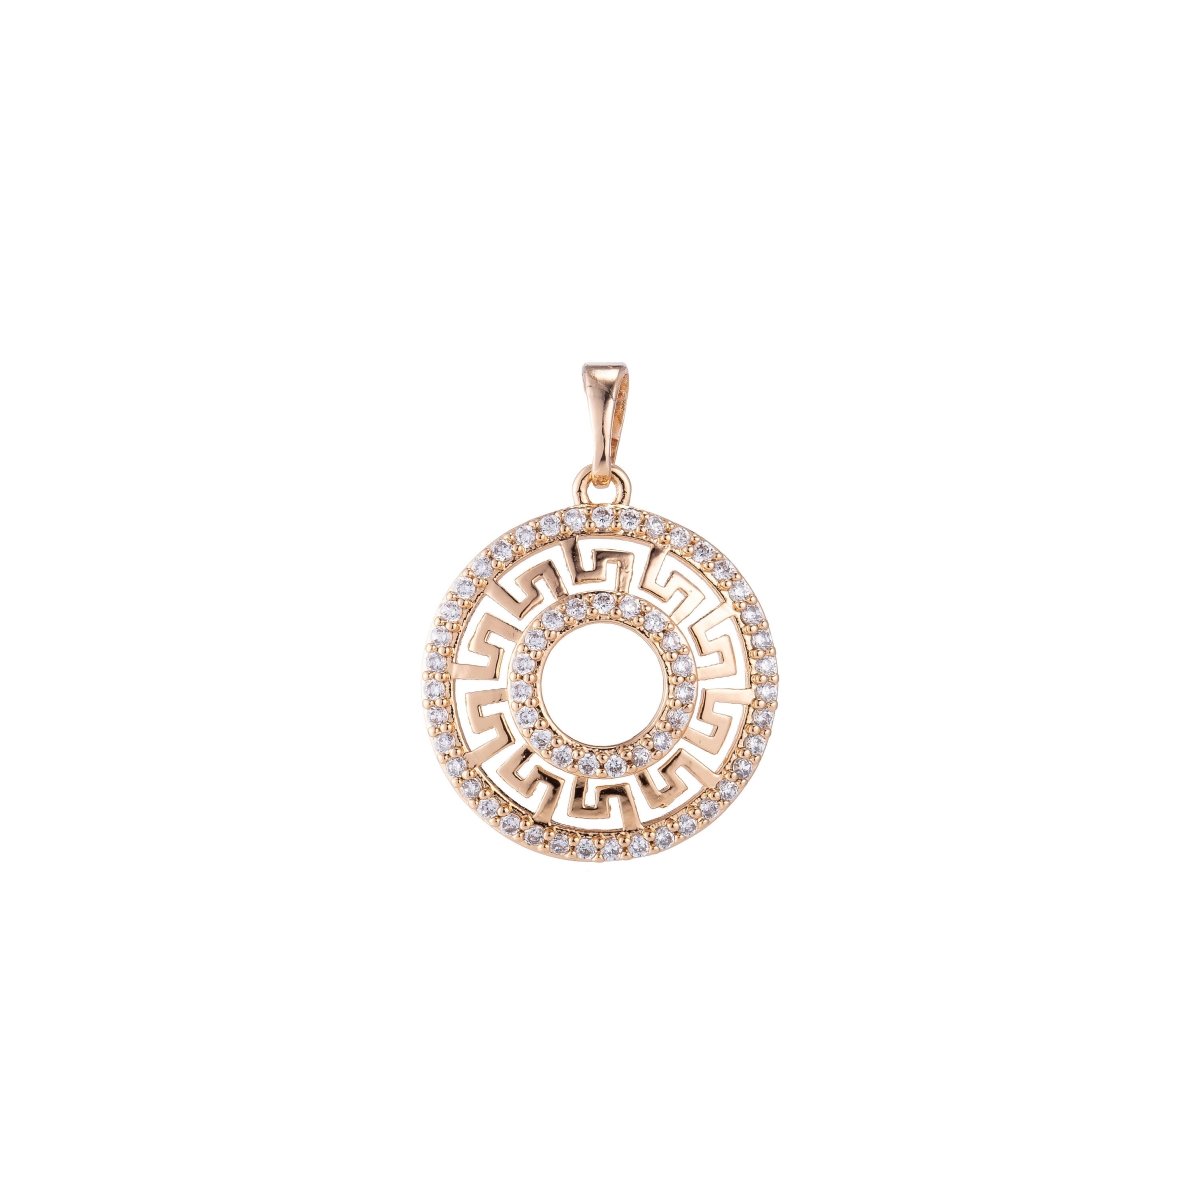 Gold Fill Round Circle Geometric Pattern, Classy Gift for Her, Elegant, Cubic Zirconia Necklace Pendant Charm Bead Bails Findings for Jewelry Making H-708 - DLUXCA